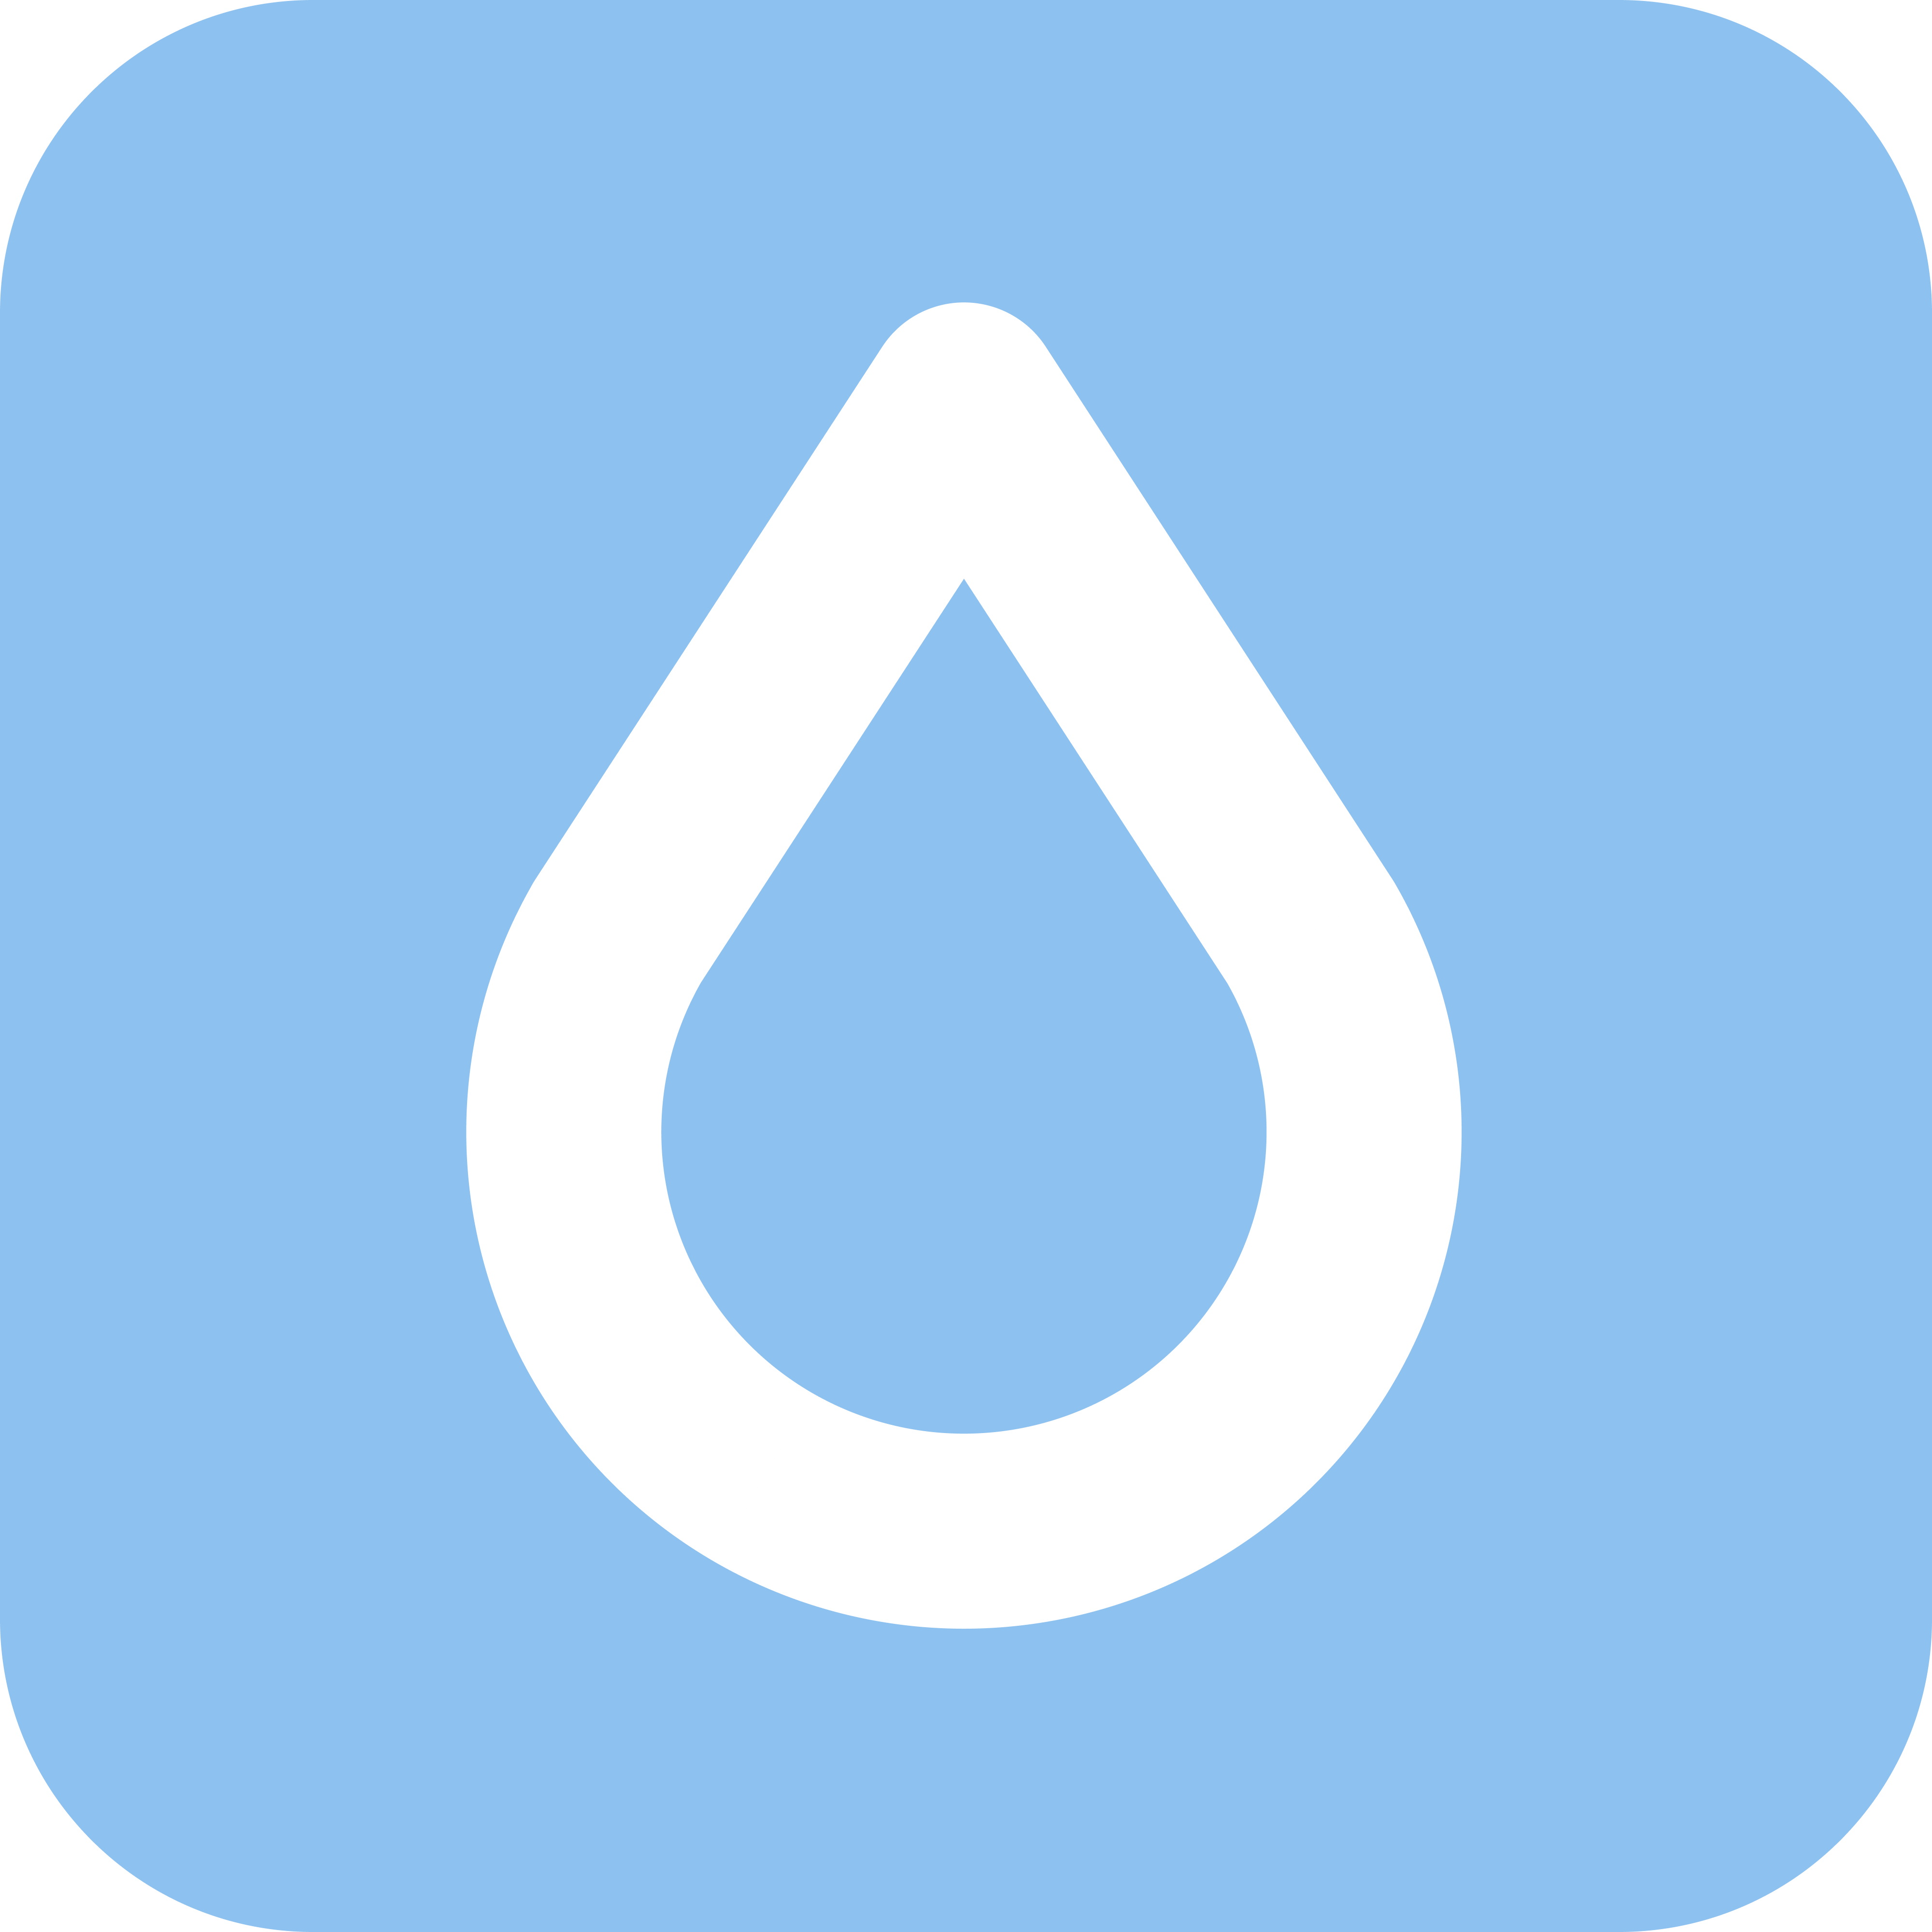 Hydrogen Executor For Android & MacOS